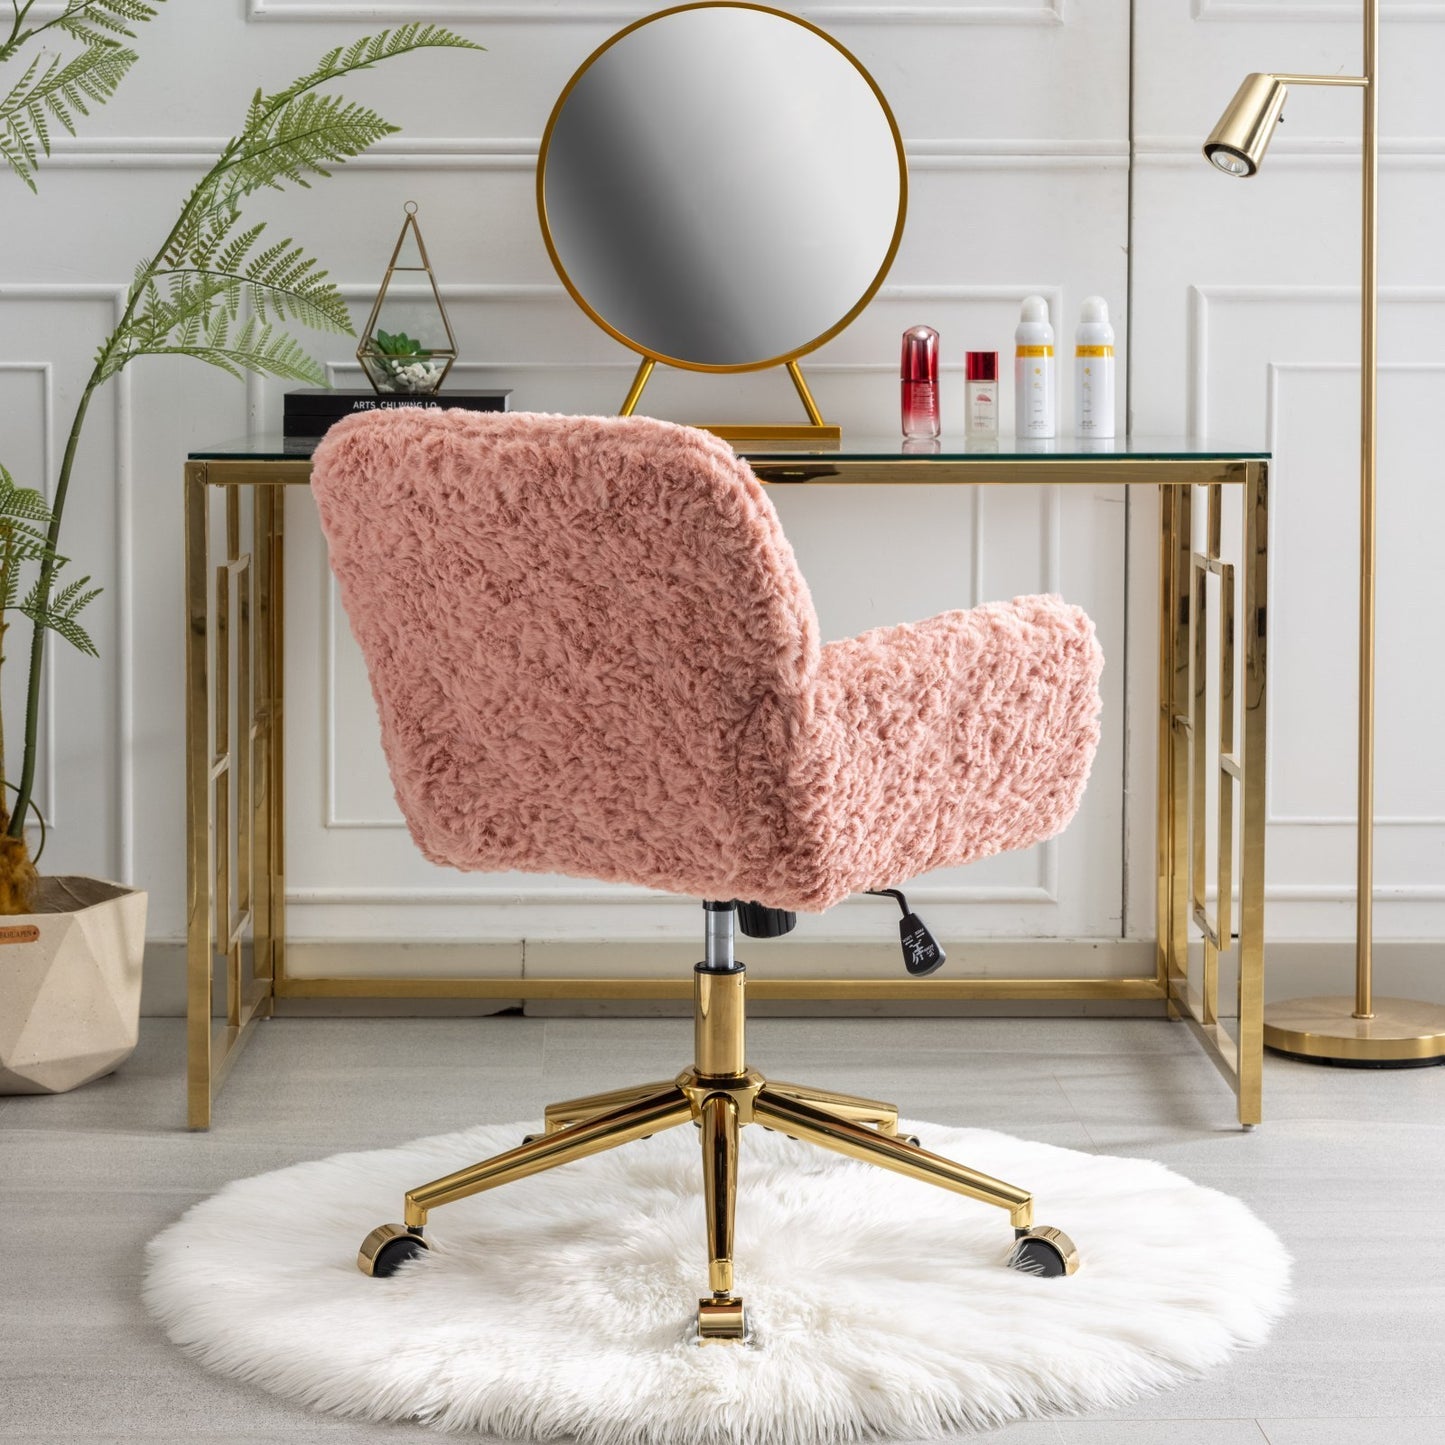 Furniture Office Chair,Artificial rabbit hair Home Office Chair with Golden Metal Base,Adjustable Desk Chair Swivel Office Chair,Vanity Chair(Pink)